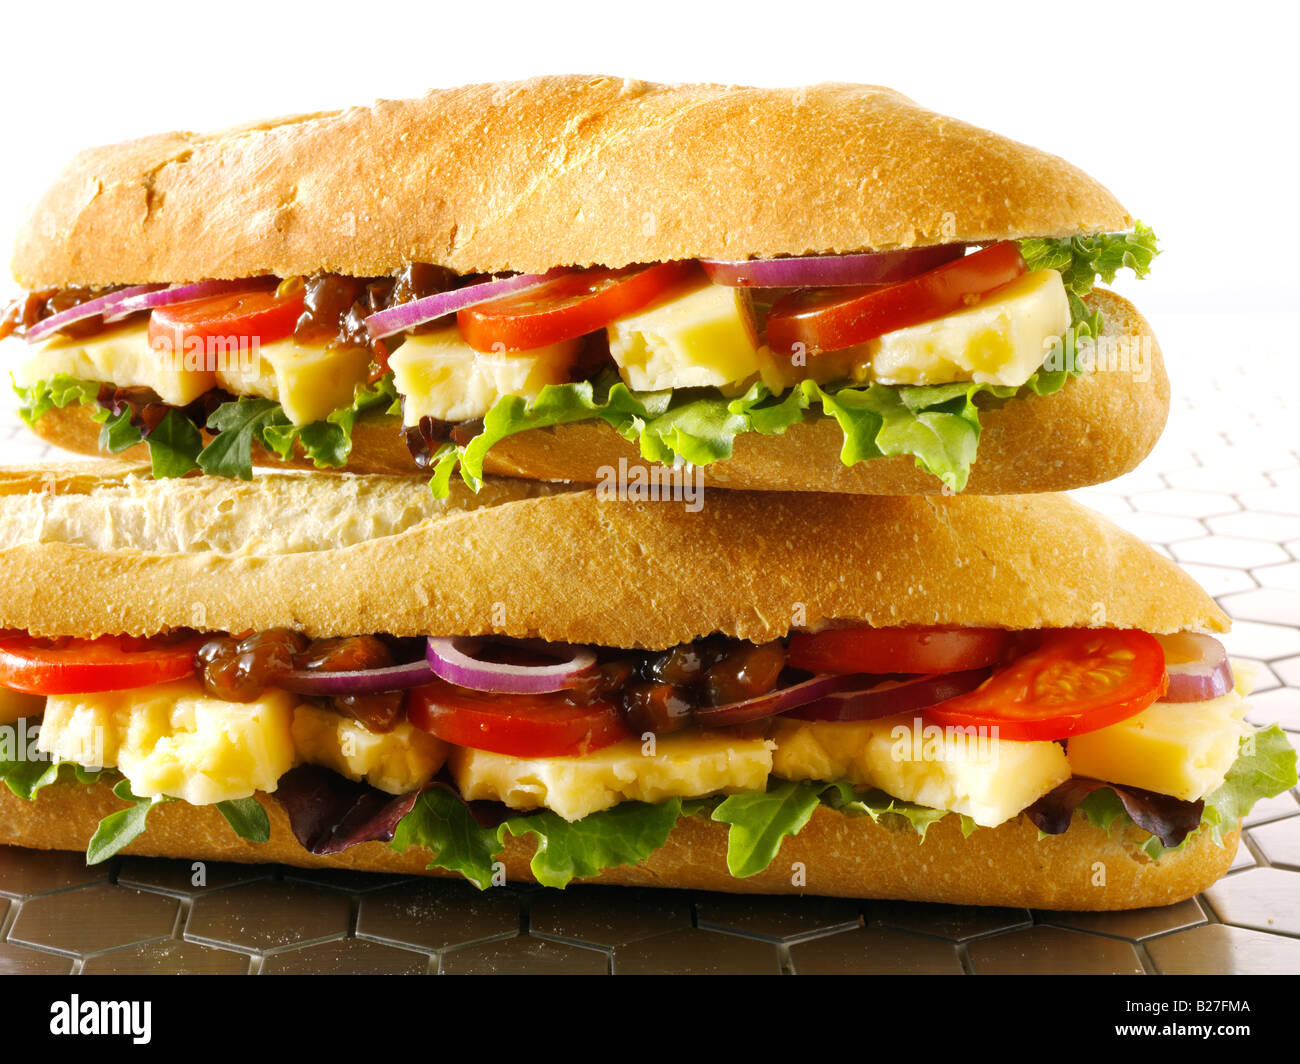 close up of cheese salad pickle baguette in french bread stick Stock Photo